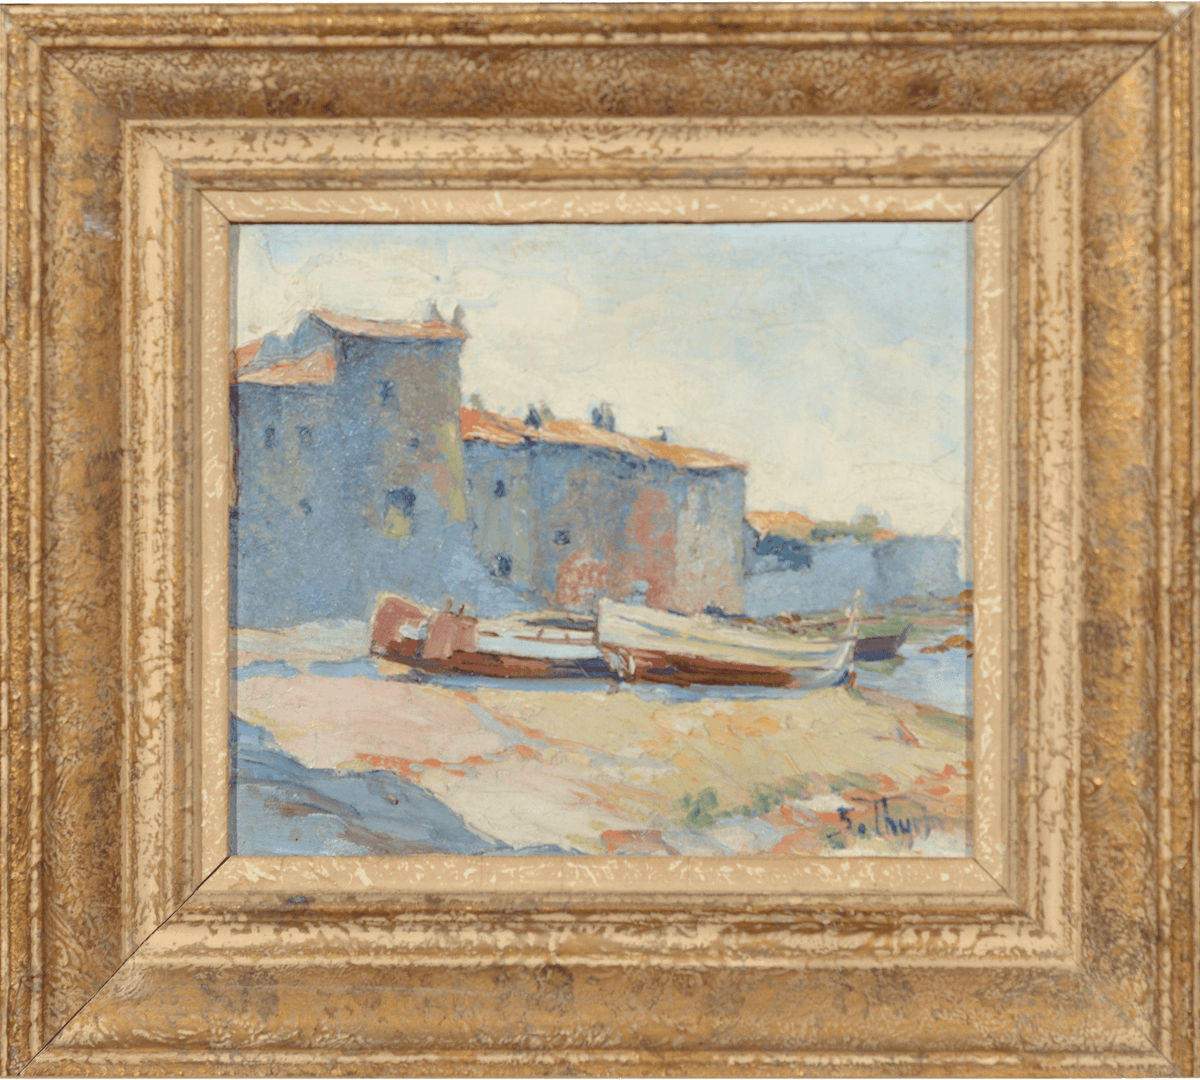 Painting From 20th Century Representing Saint Tropez. - Retouch Fine Art